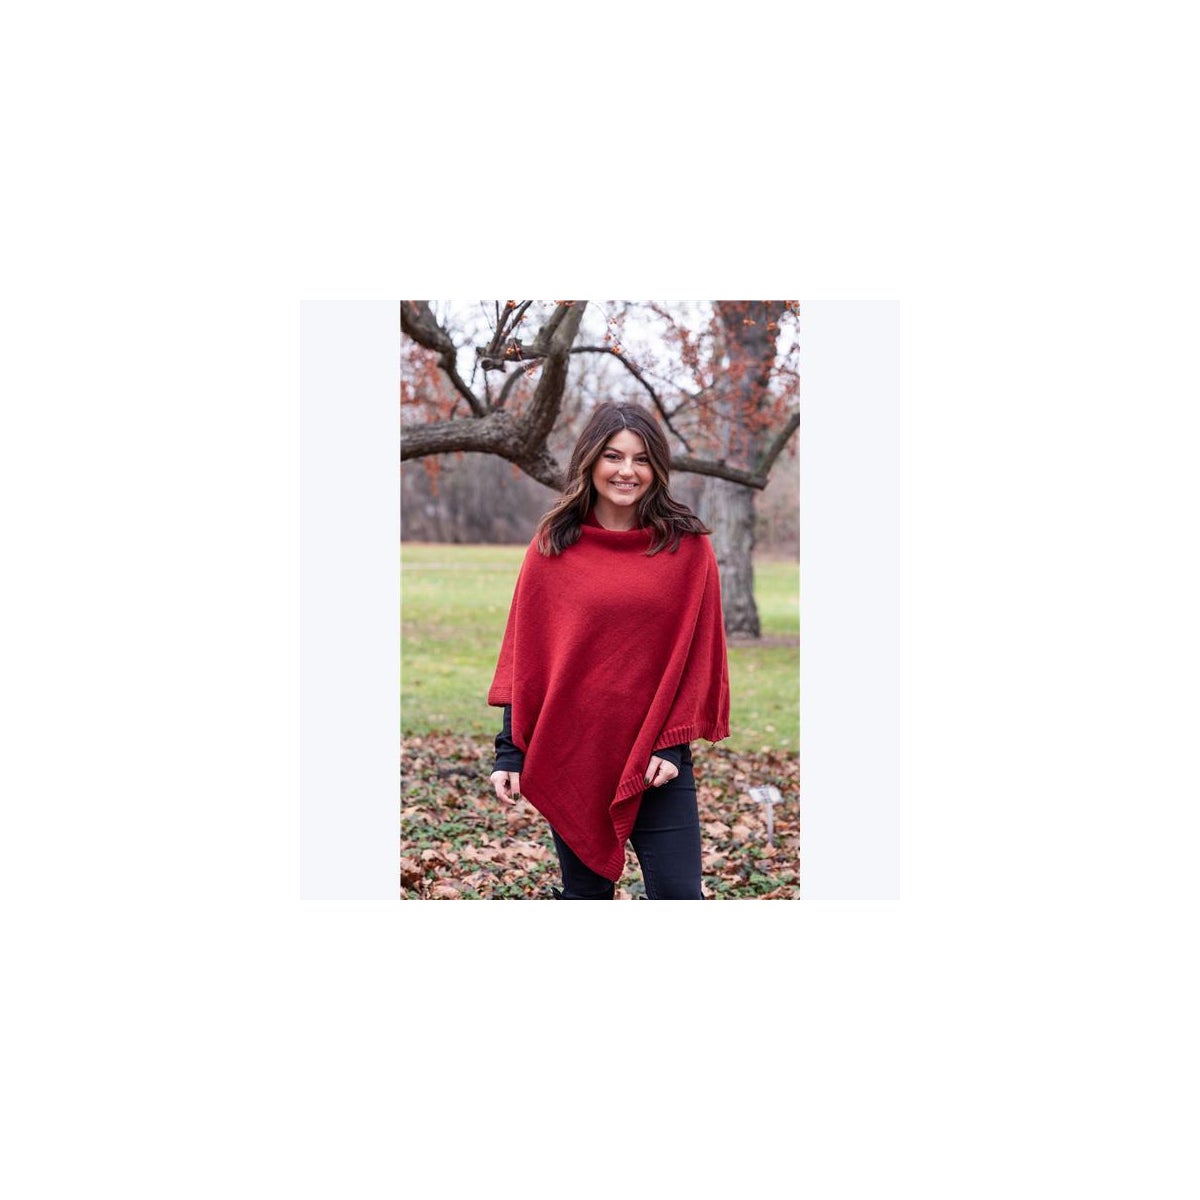 Knit Overhead Poncho